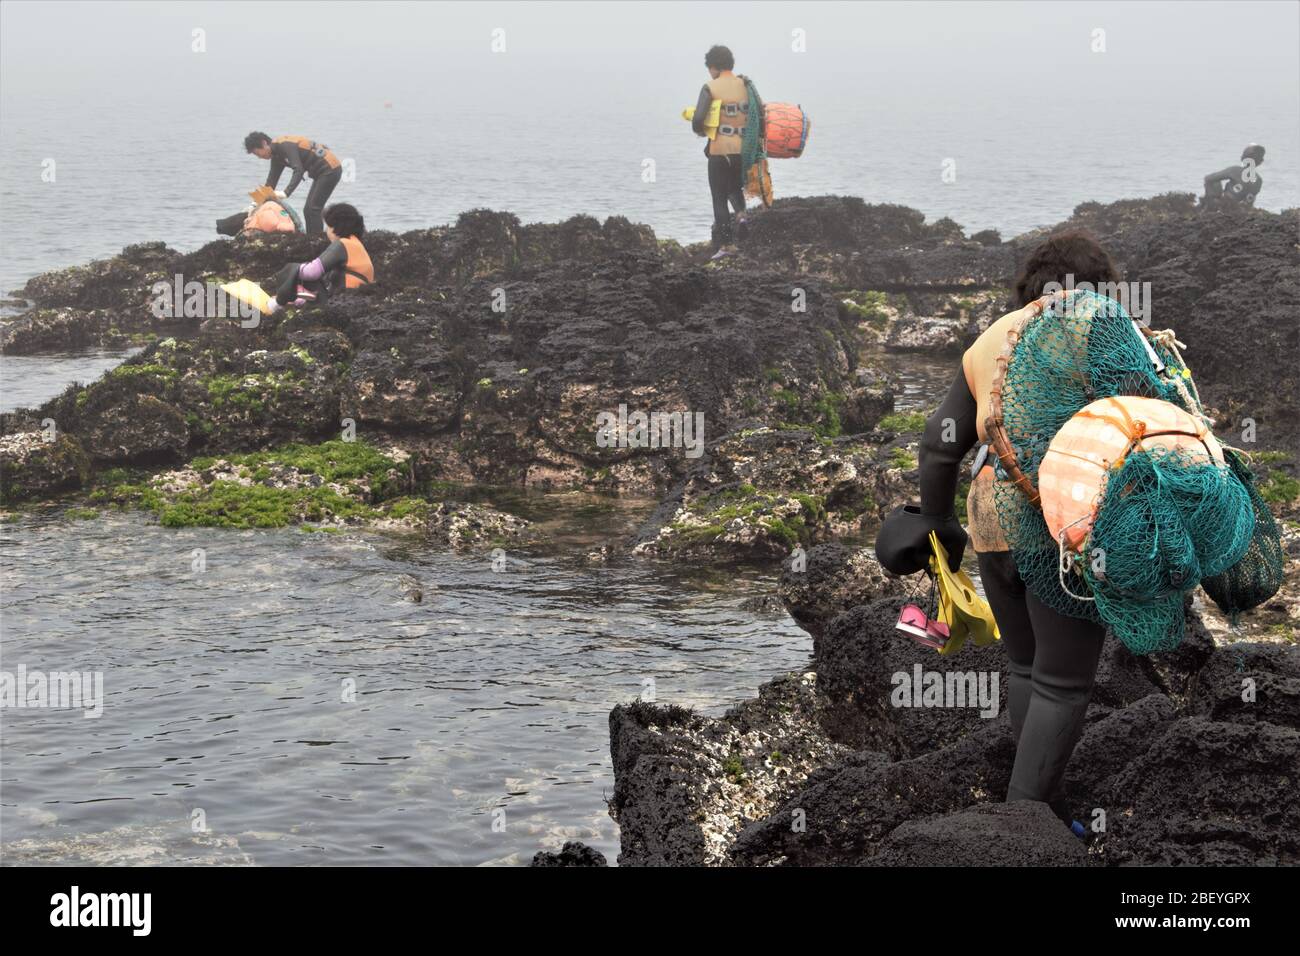 Haenyeo, female divers in the Korean province of Jeju, on their way to work Stock Photo